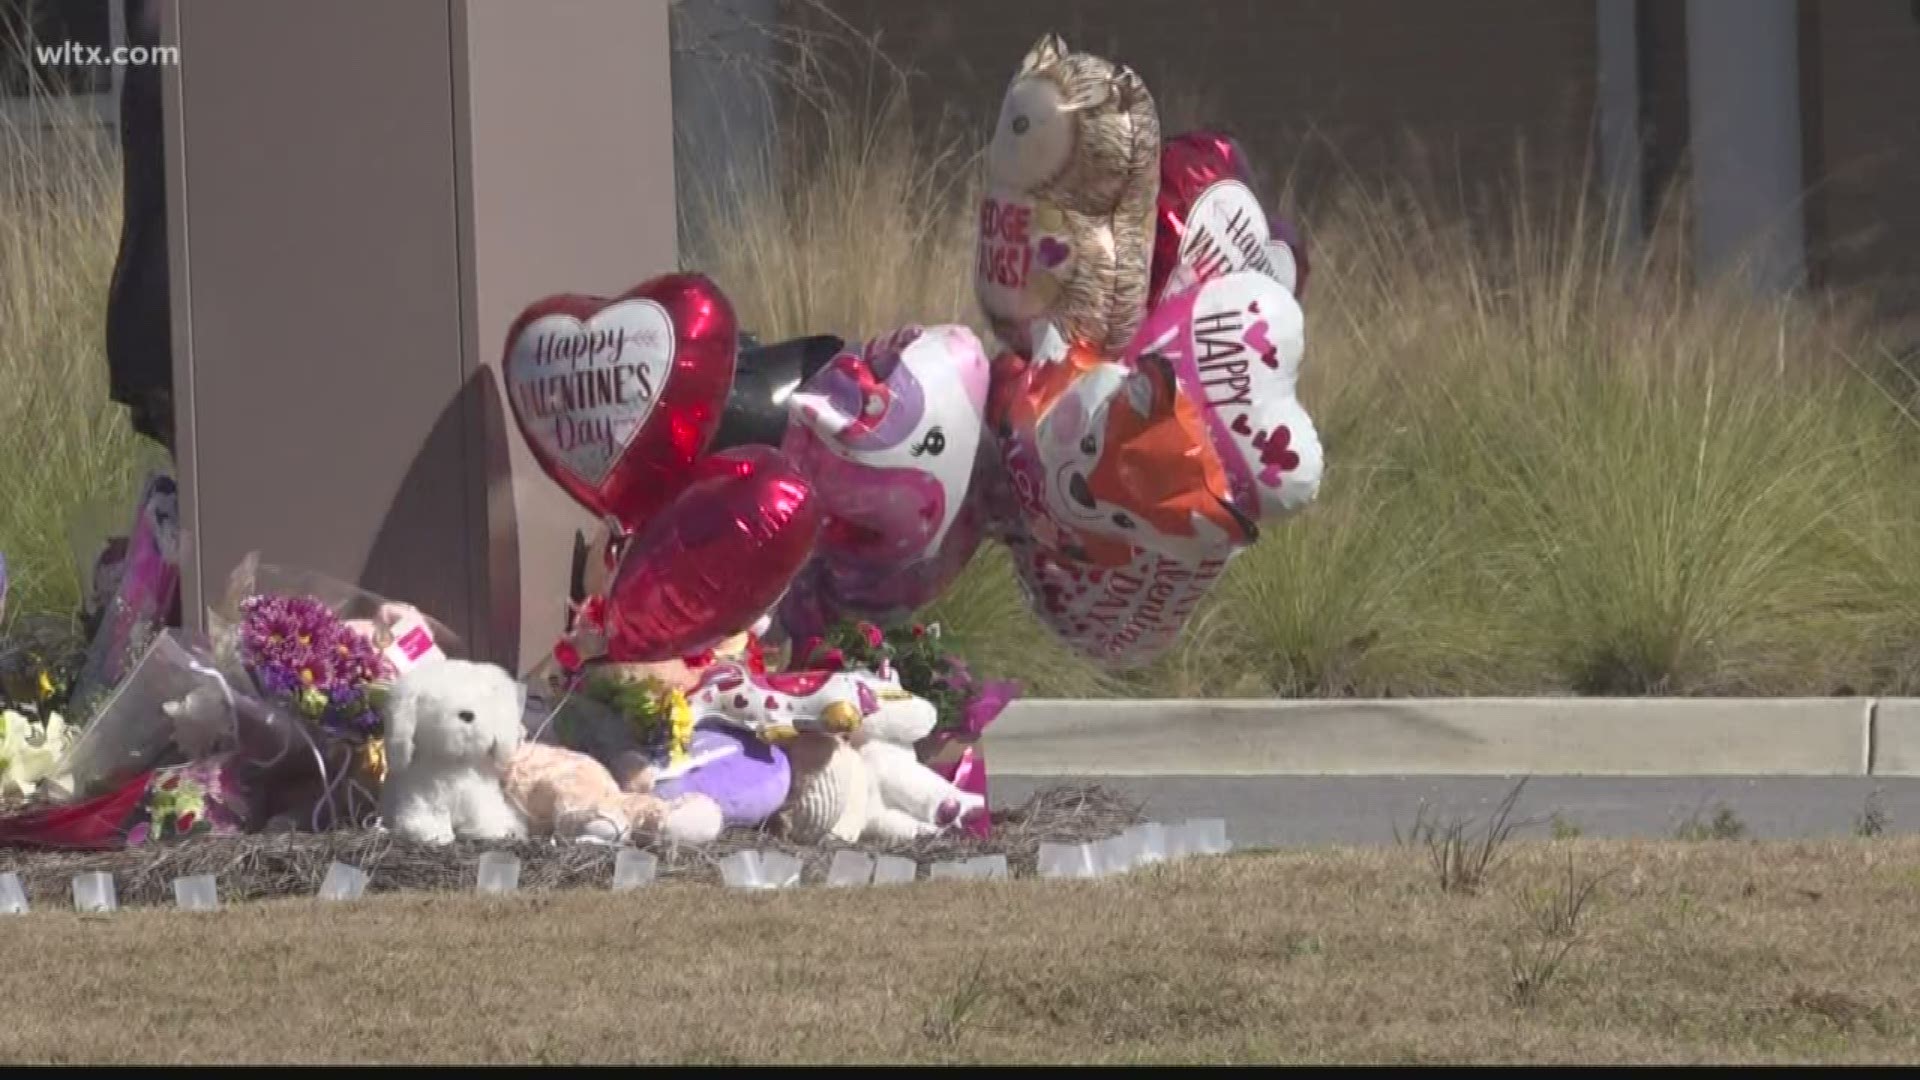 The memorial at Springdale Elementary continues to grow as people remember Faye Swetlik.